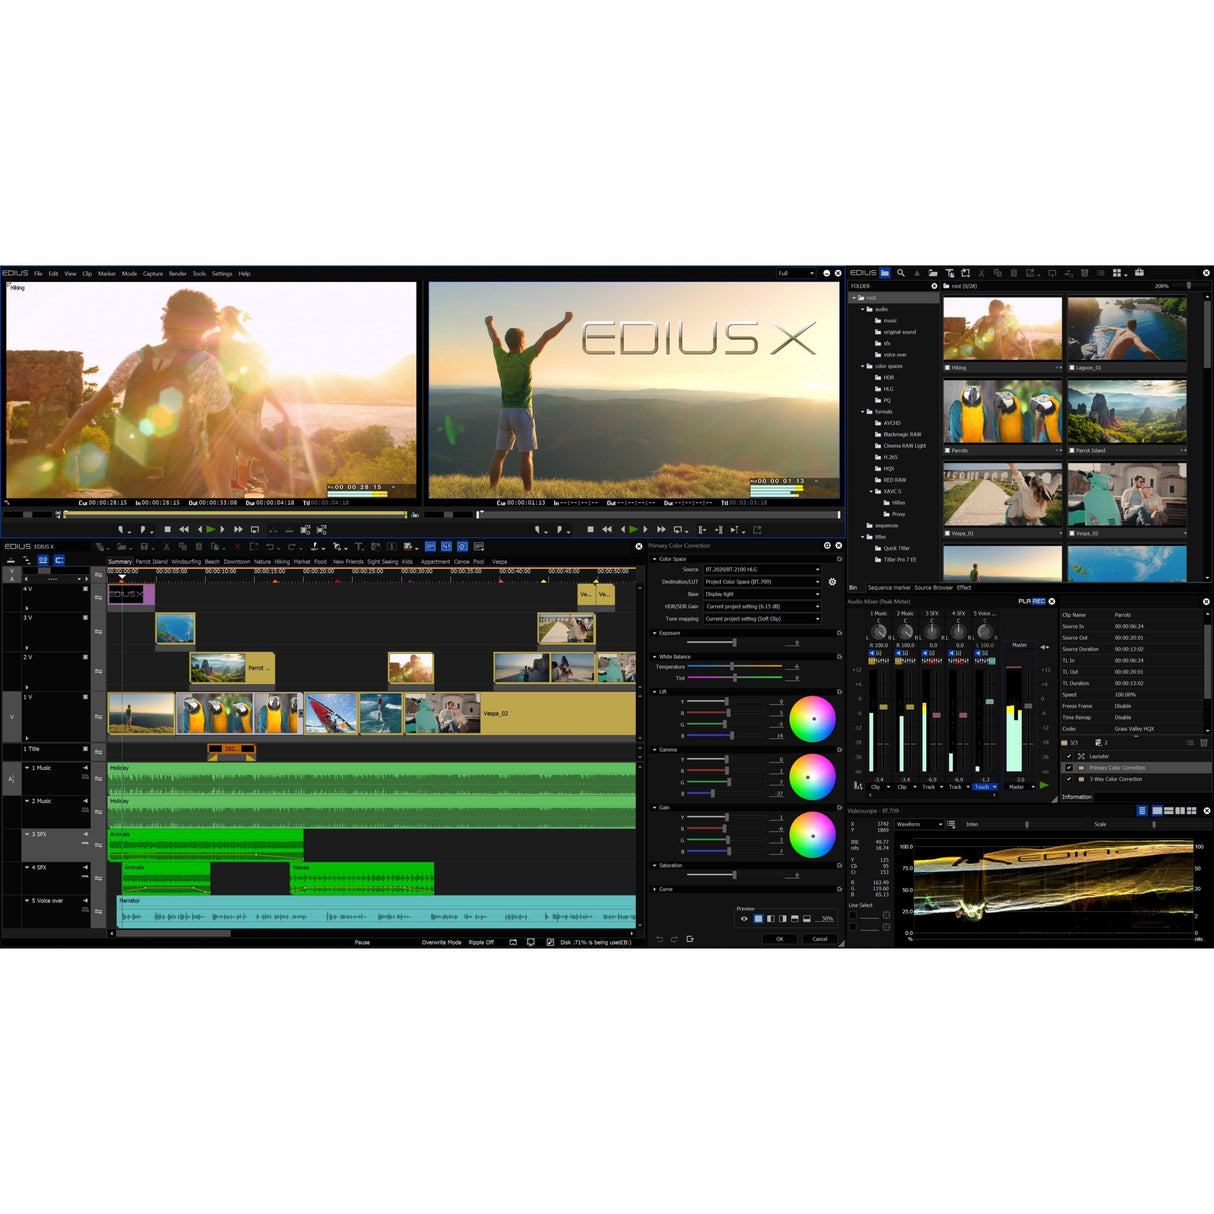 EDIUS X Workgroup Video Editing Software Upgrade for EDIUS Workgroup 9, Download Only